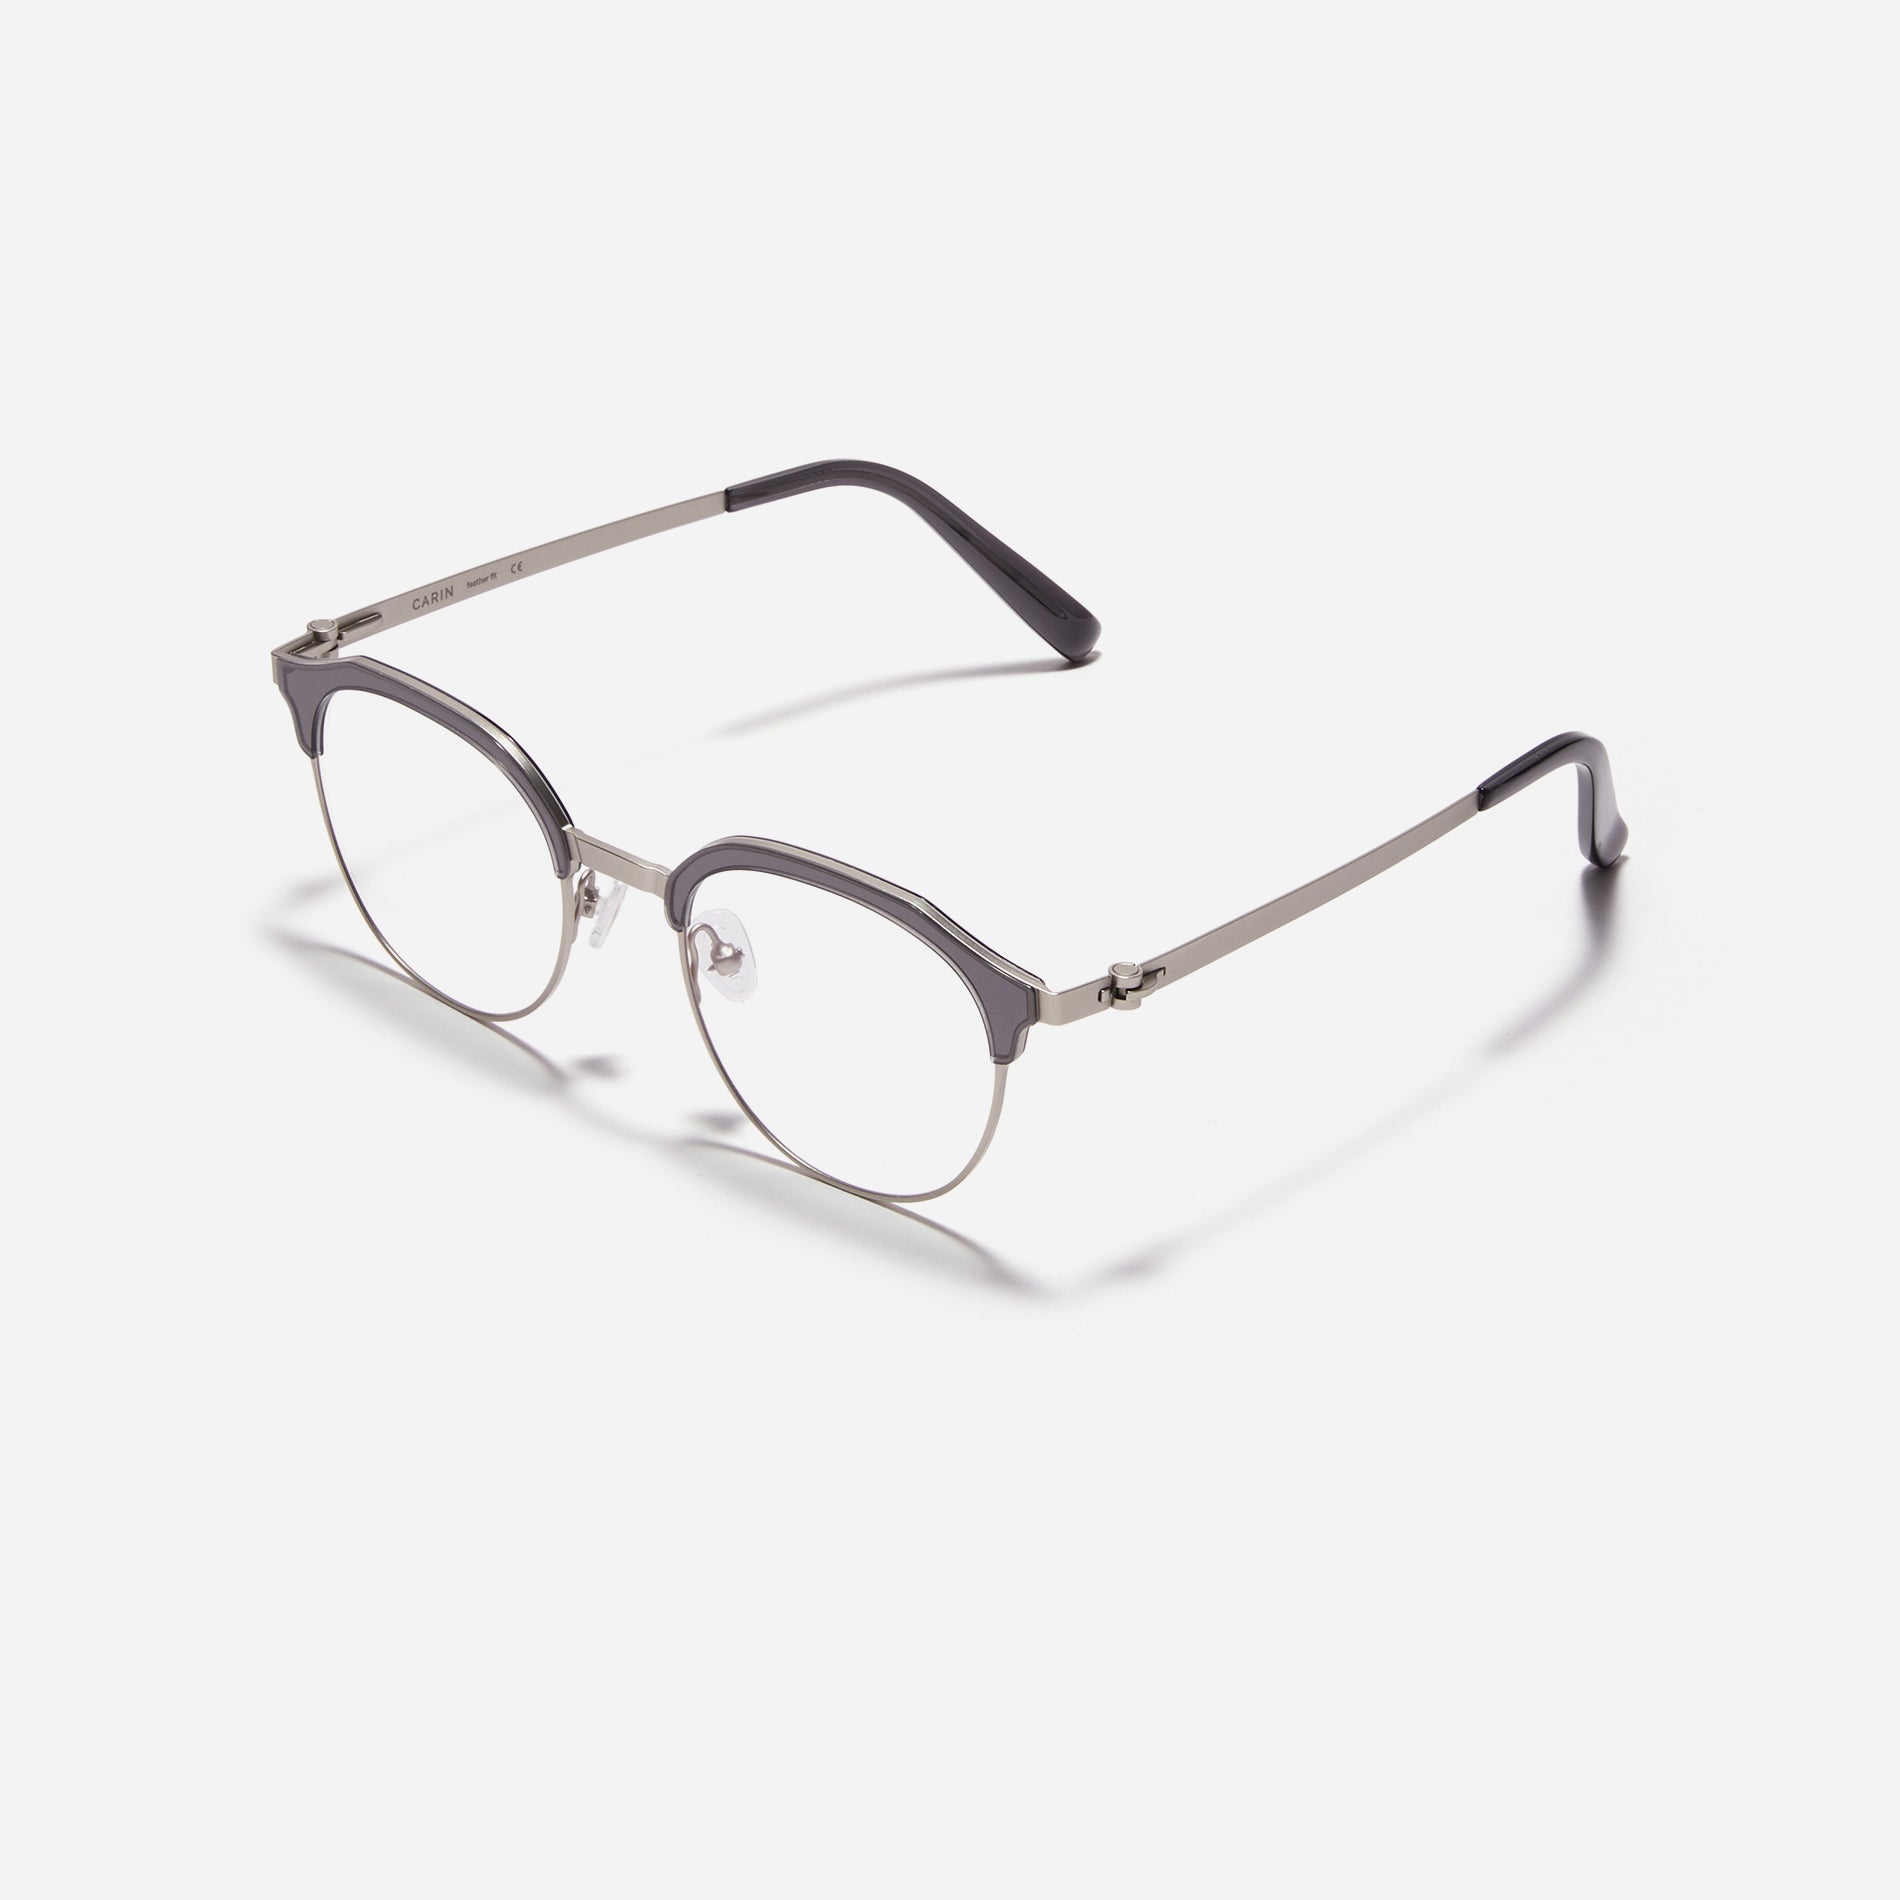 Lightweight polygon-shaped eyeglasses from CARIN's 'Feather Fit' line, offering a contemporary twist on the classic browline design. 